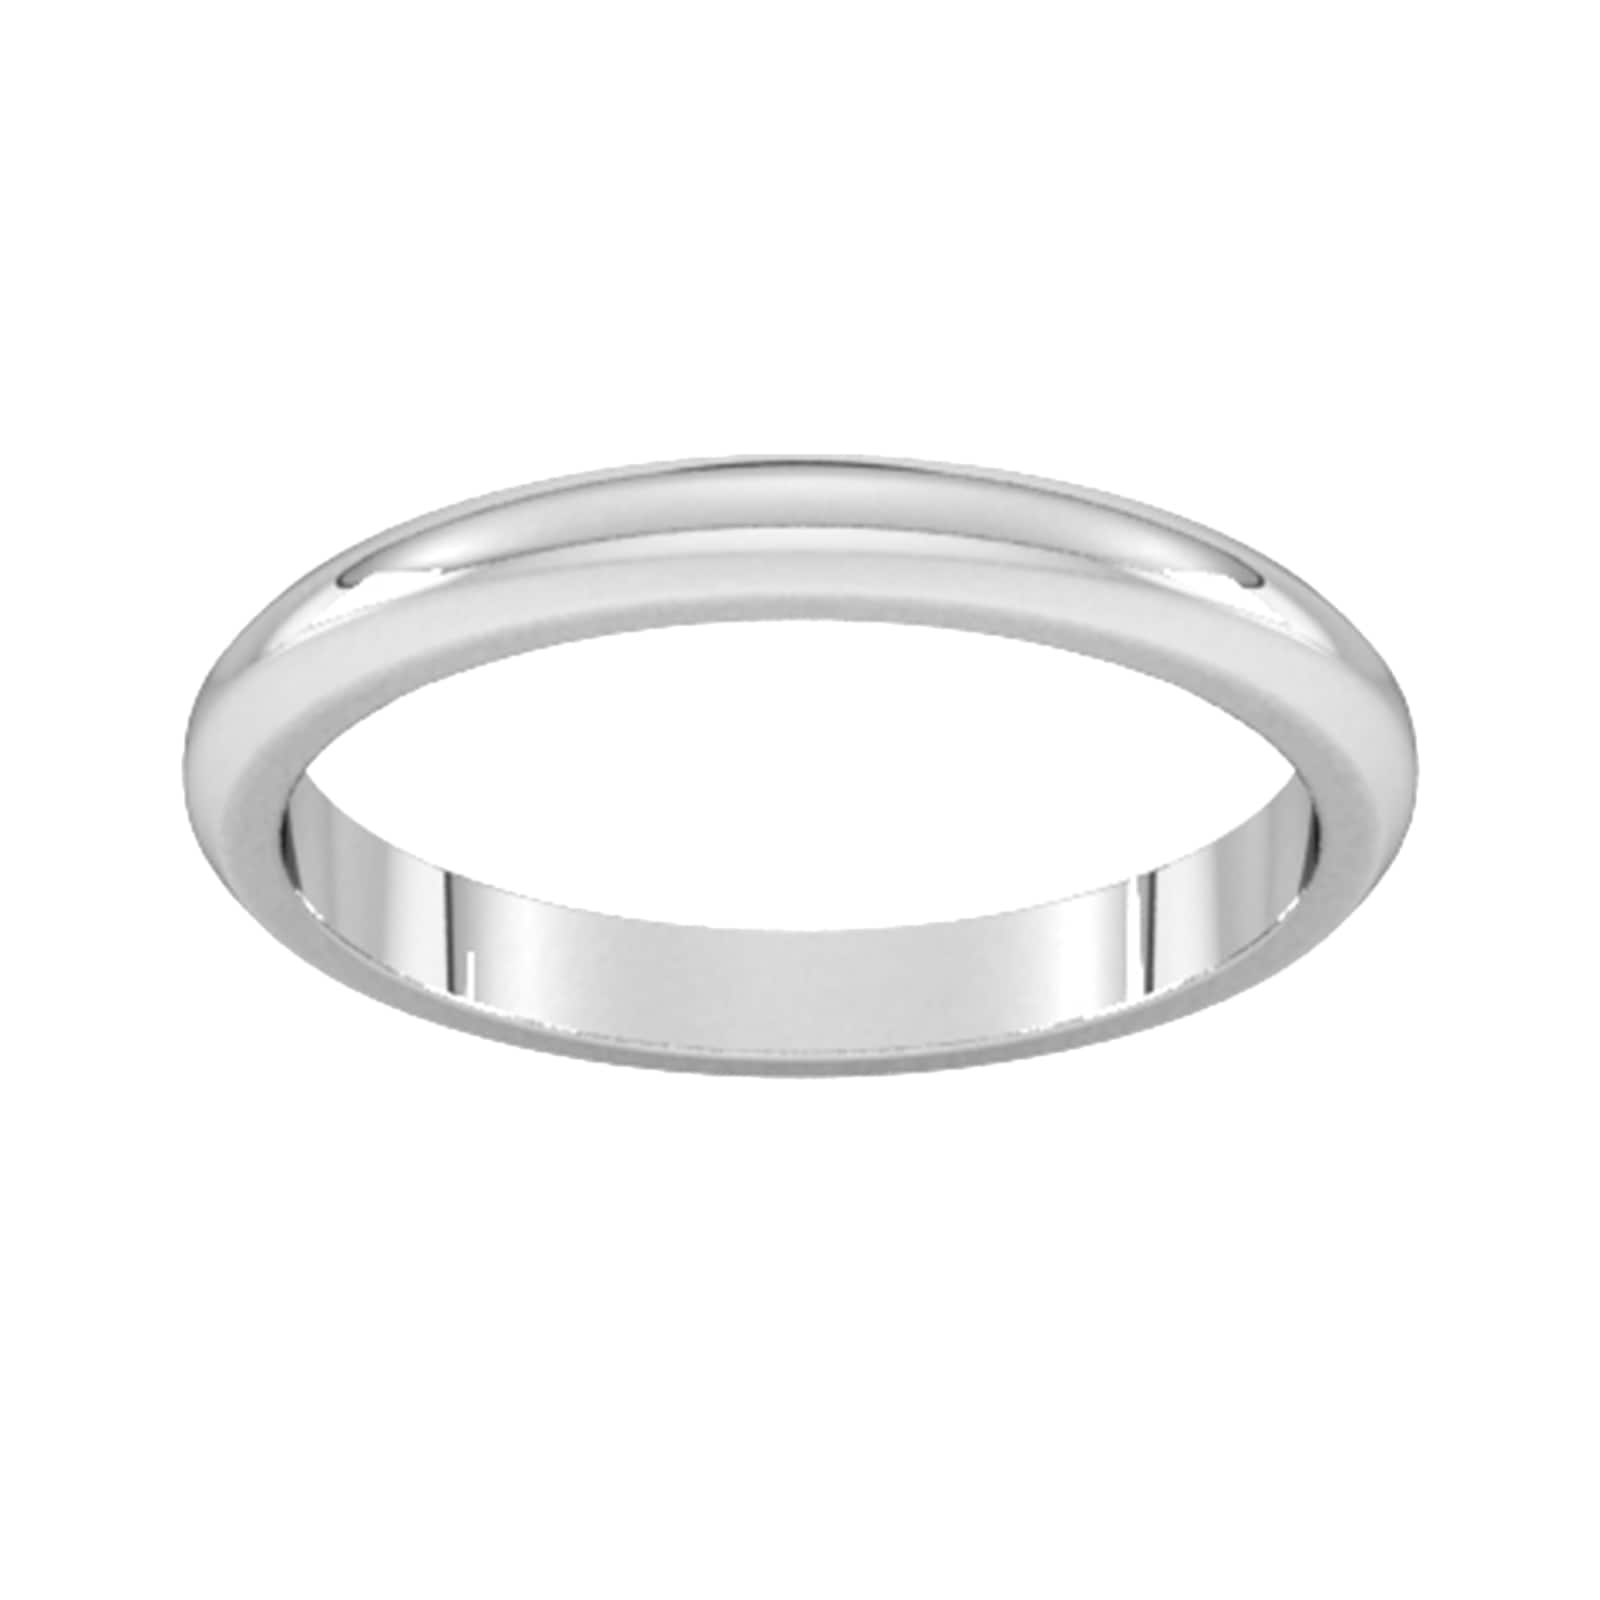 2.5mm D Shape Heavy Wedding Ring In 9 Carat White Gold - Ring Size G